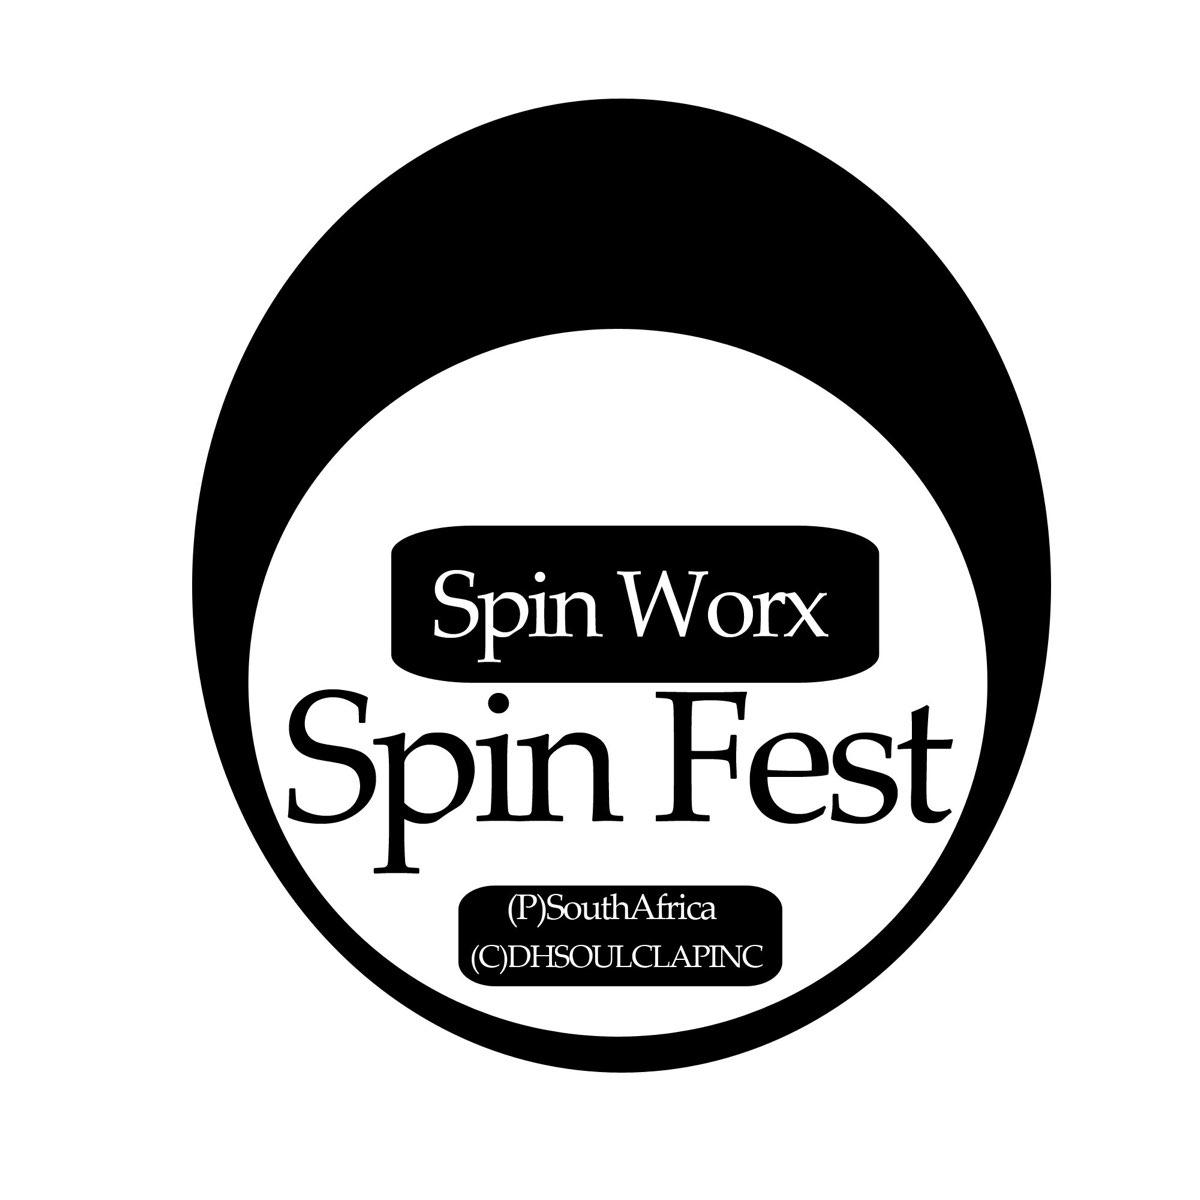 Spinning слова. Spin Music. Spin Worx haaaak. Spin перевод. Spin Music service.